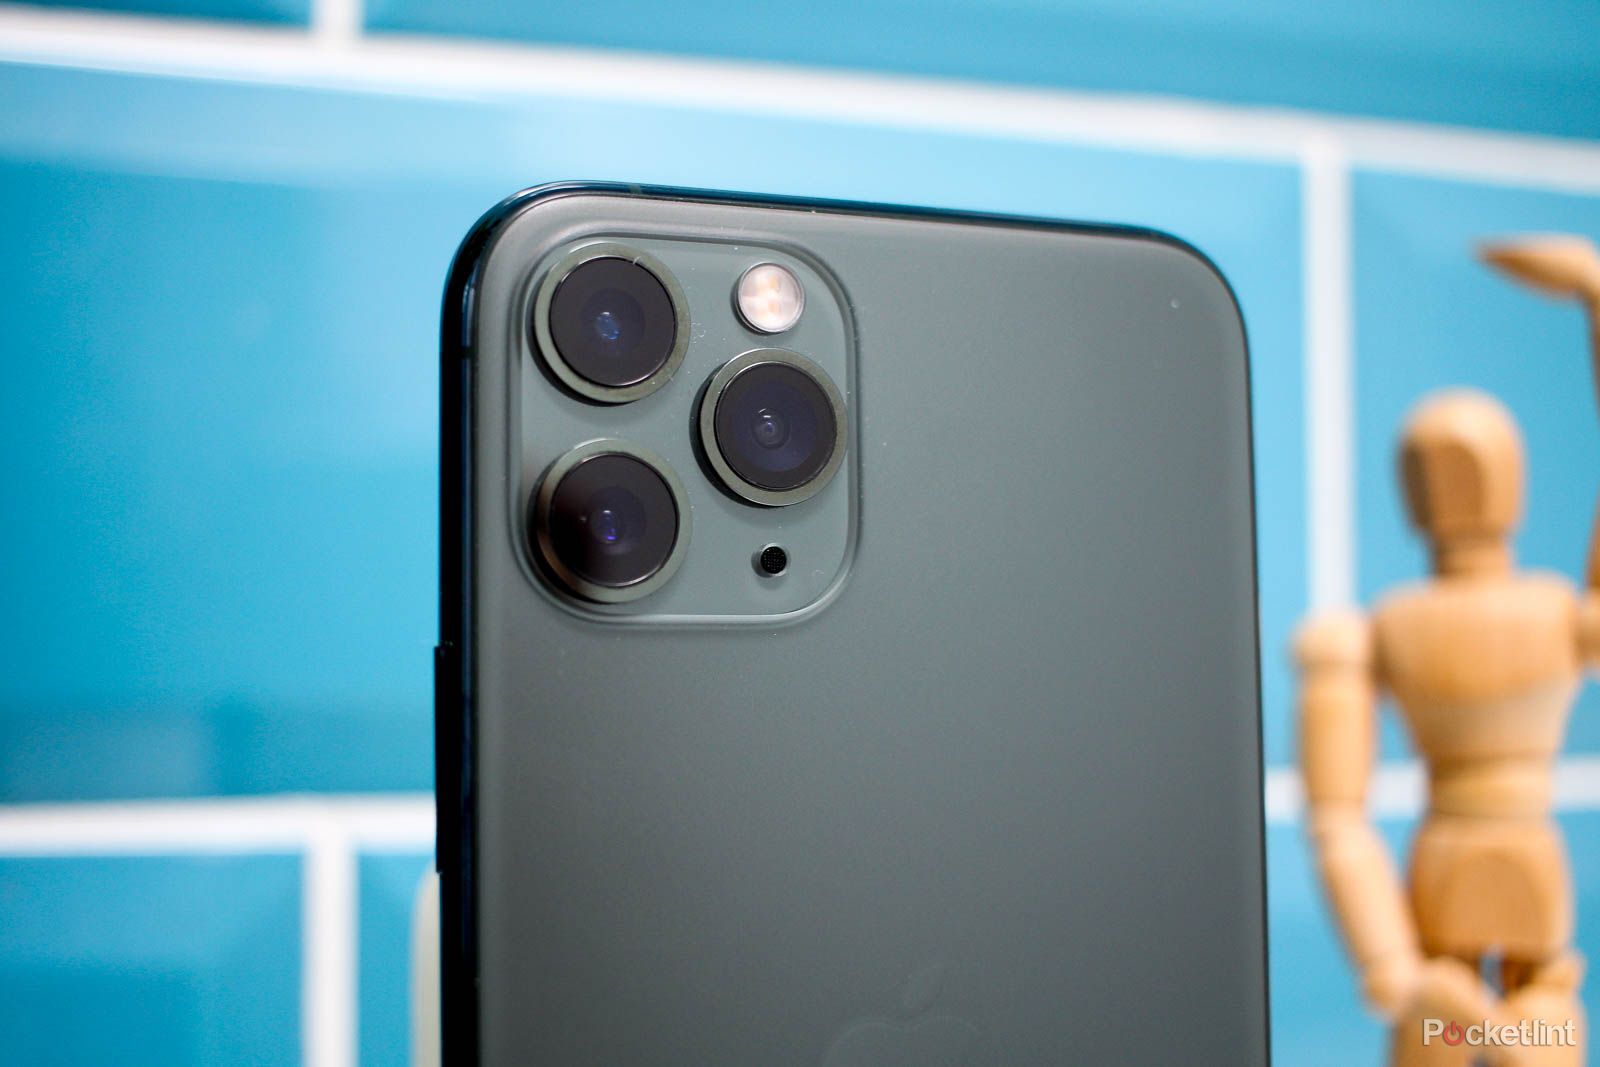 The iPhone 11 Pro might have a location privacy issue image 1